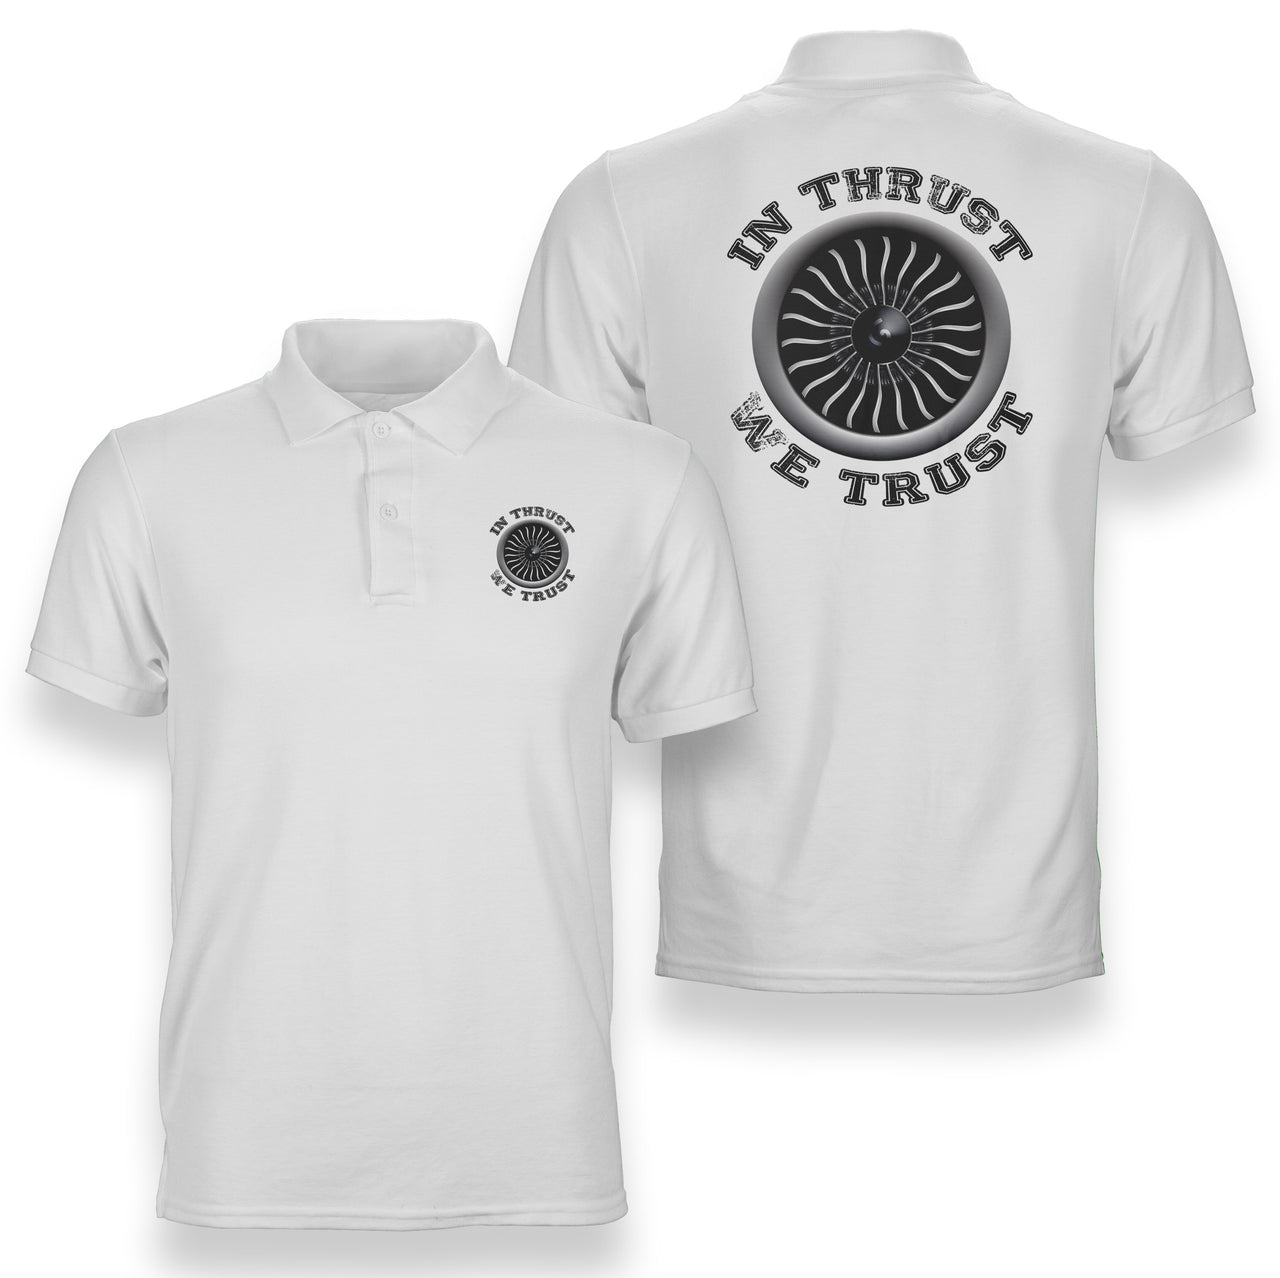 In Thrust We Trust (Vol 2) Designed Double Side Polo T-Shirts